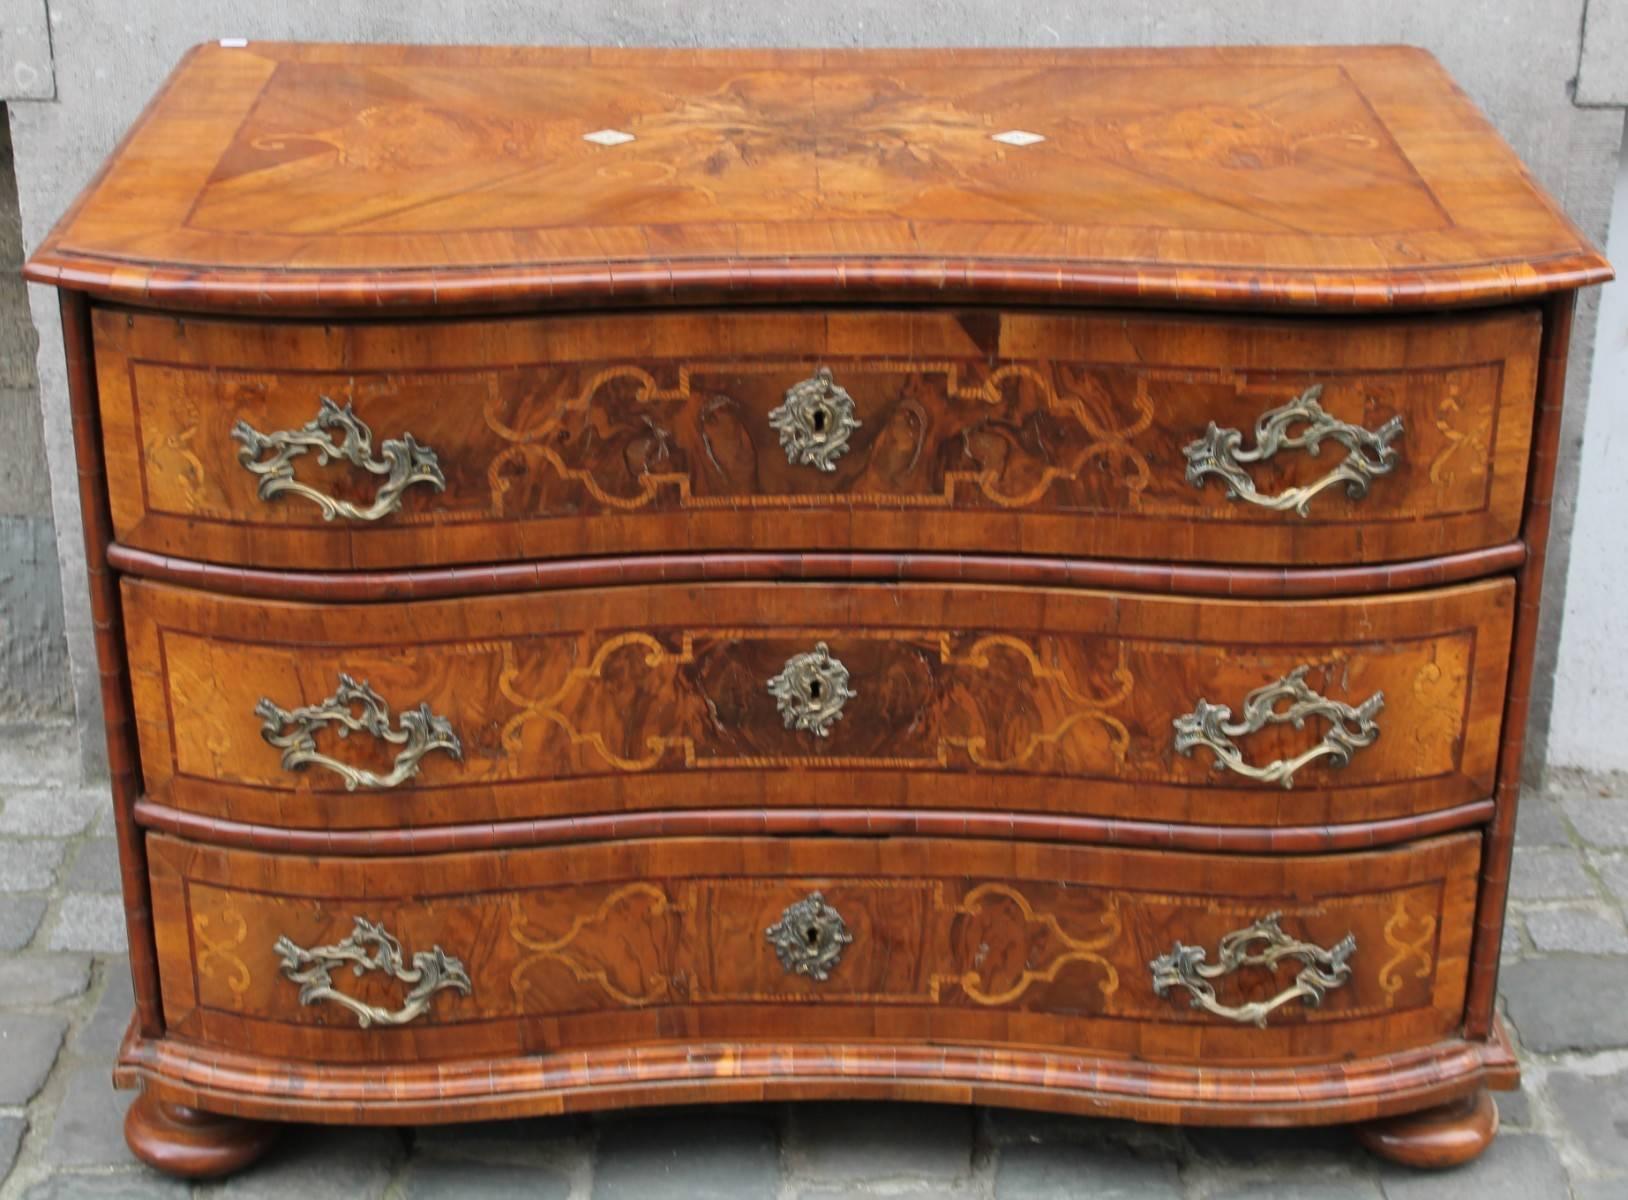 German walnut 18th century chest of drawers.
General curved look. Curved only on the face, the sides are rights. Included of three drawers, all have a frame in marquetry and a marquetry pattern. Fixed handles and locks are in gilt bronze, with a